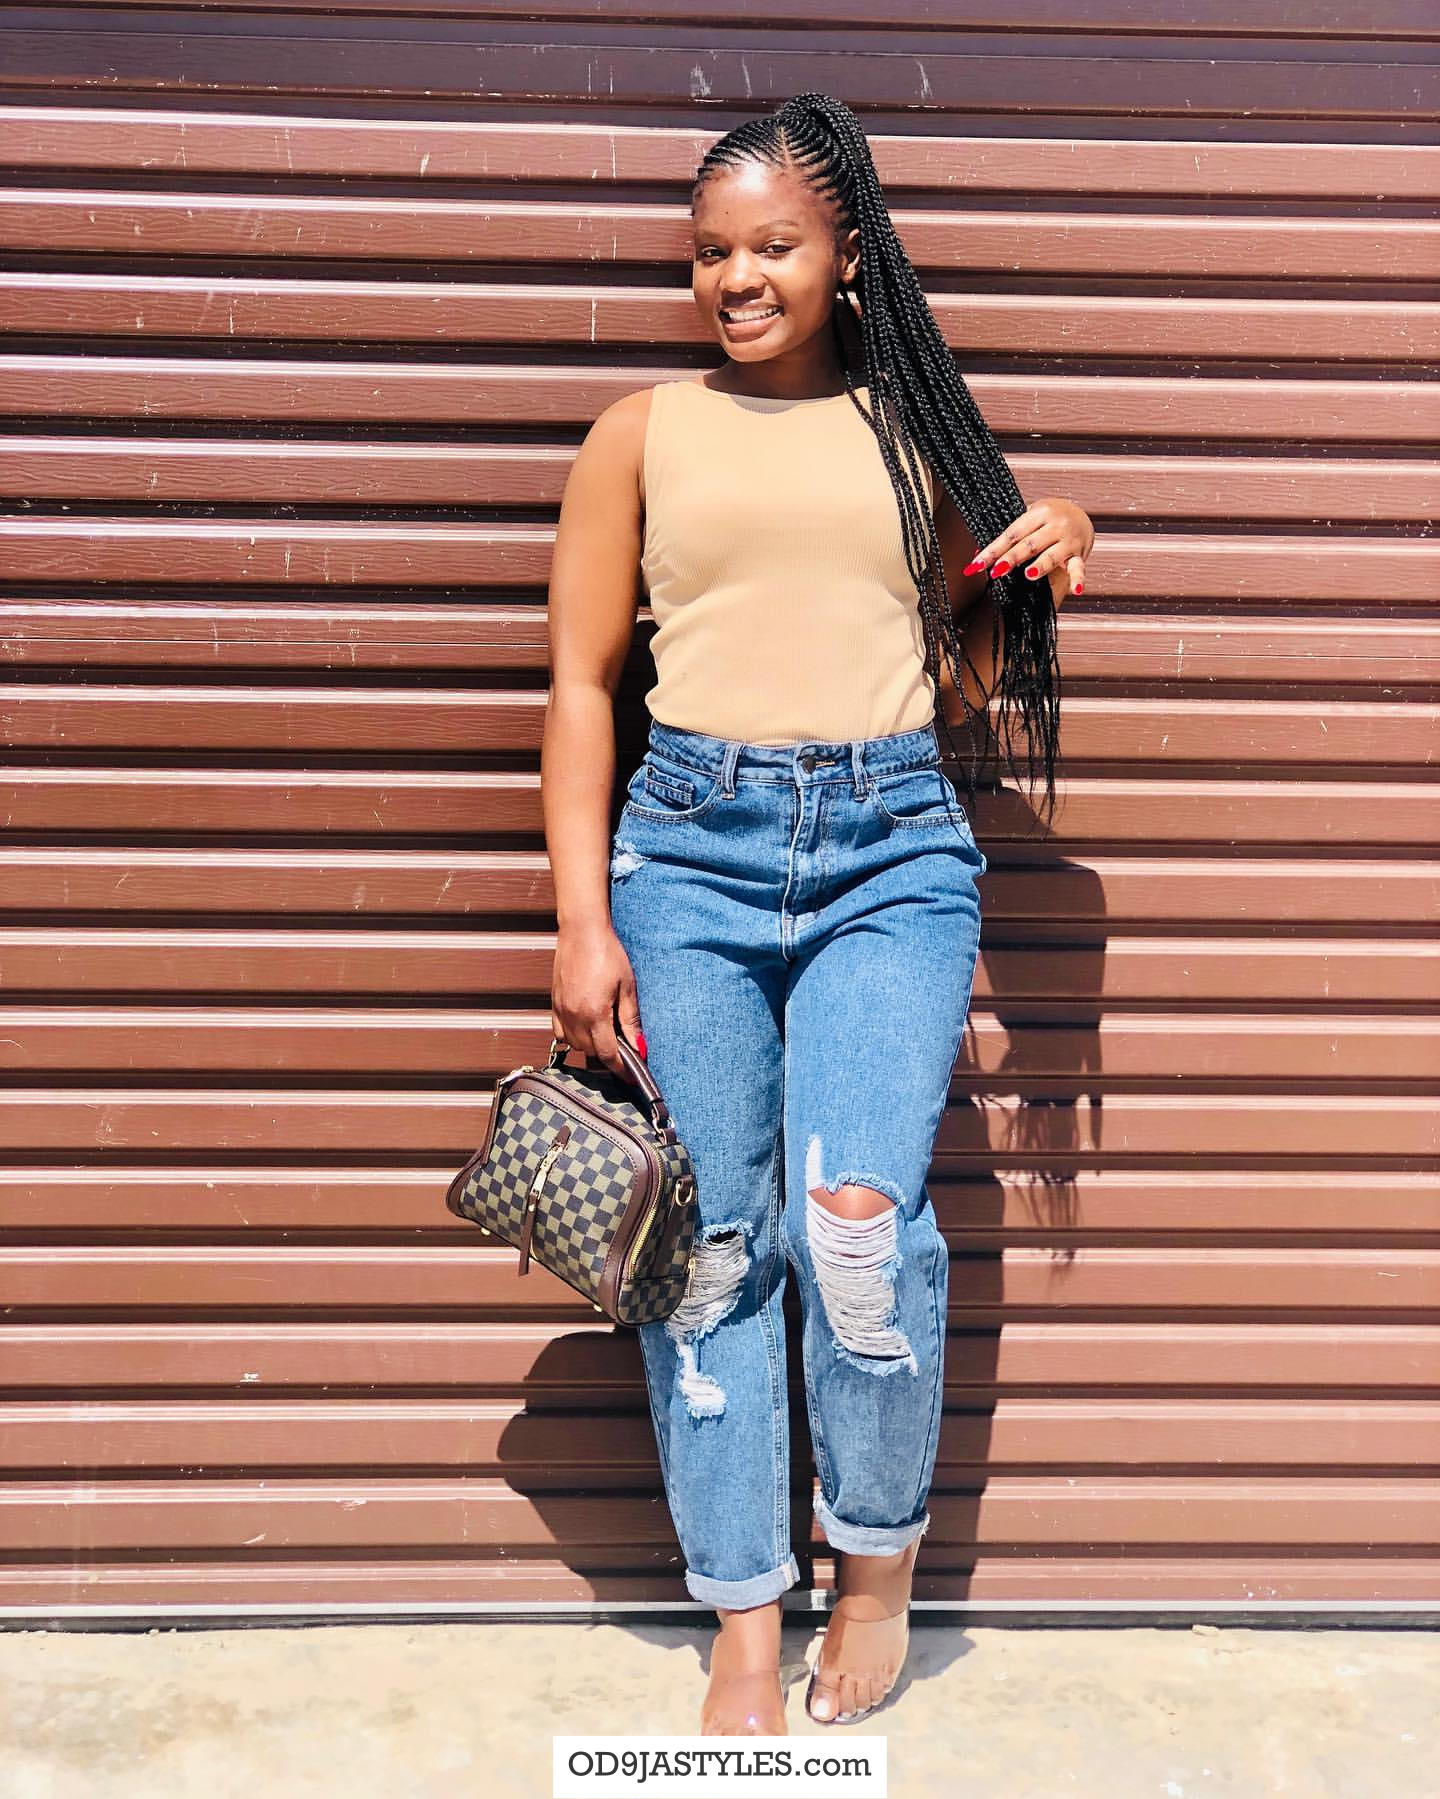 How to Style Boyfriend Jeans for a More Polished Look – OD9JASTYLES